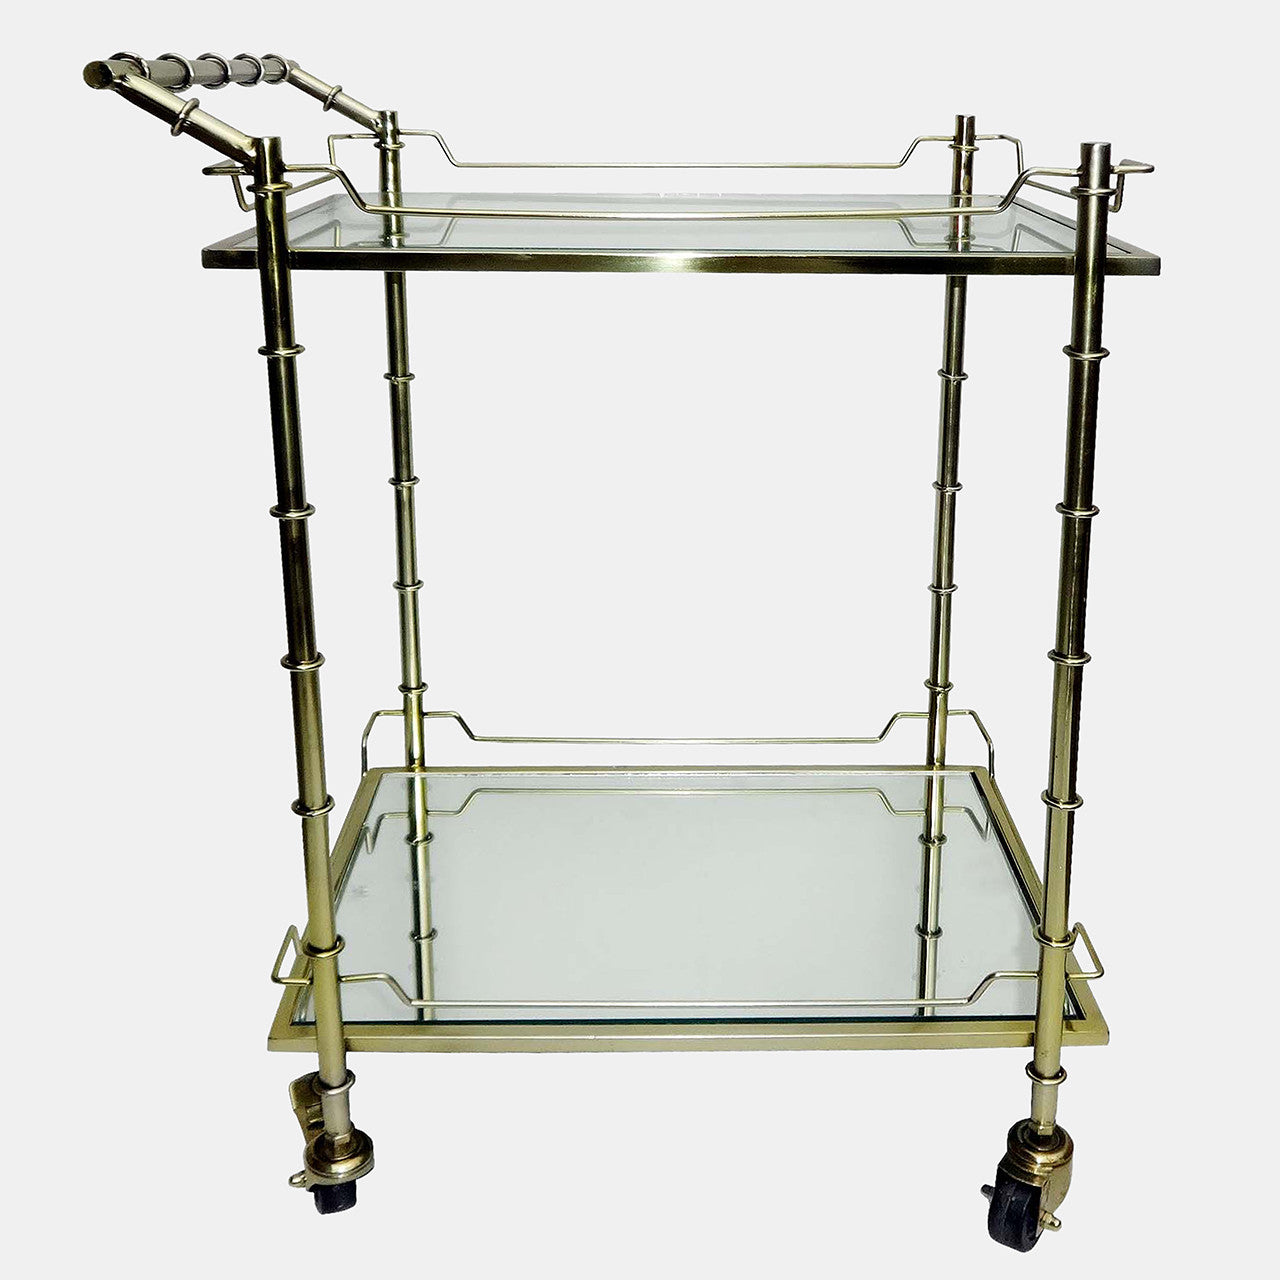 TWO TIER 30"H ROLLING BAR CART, GOLD